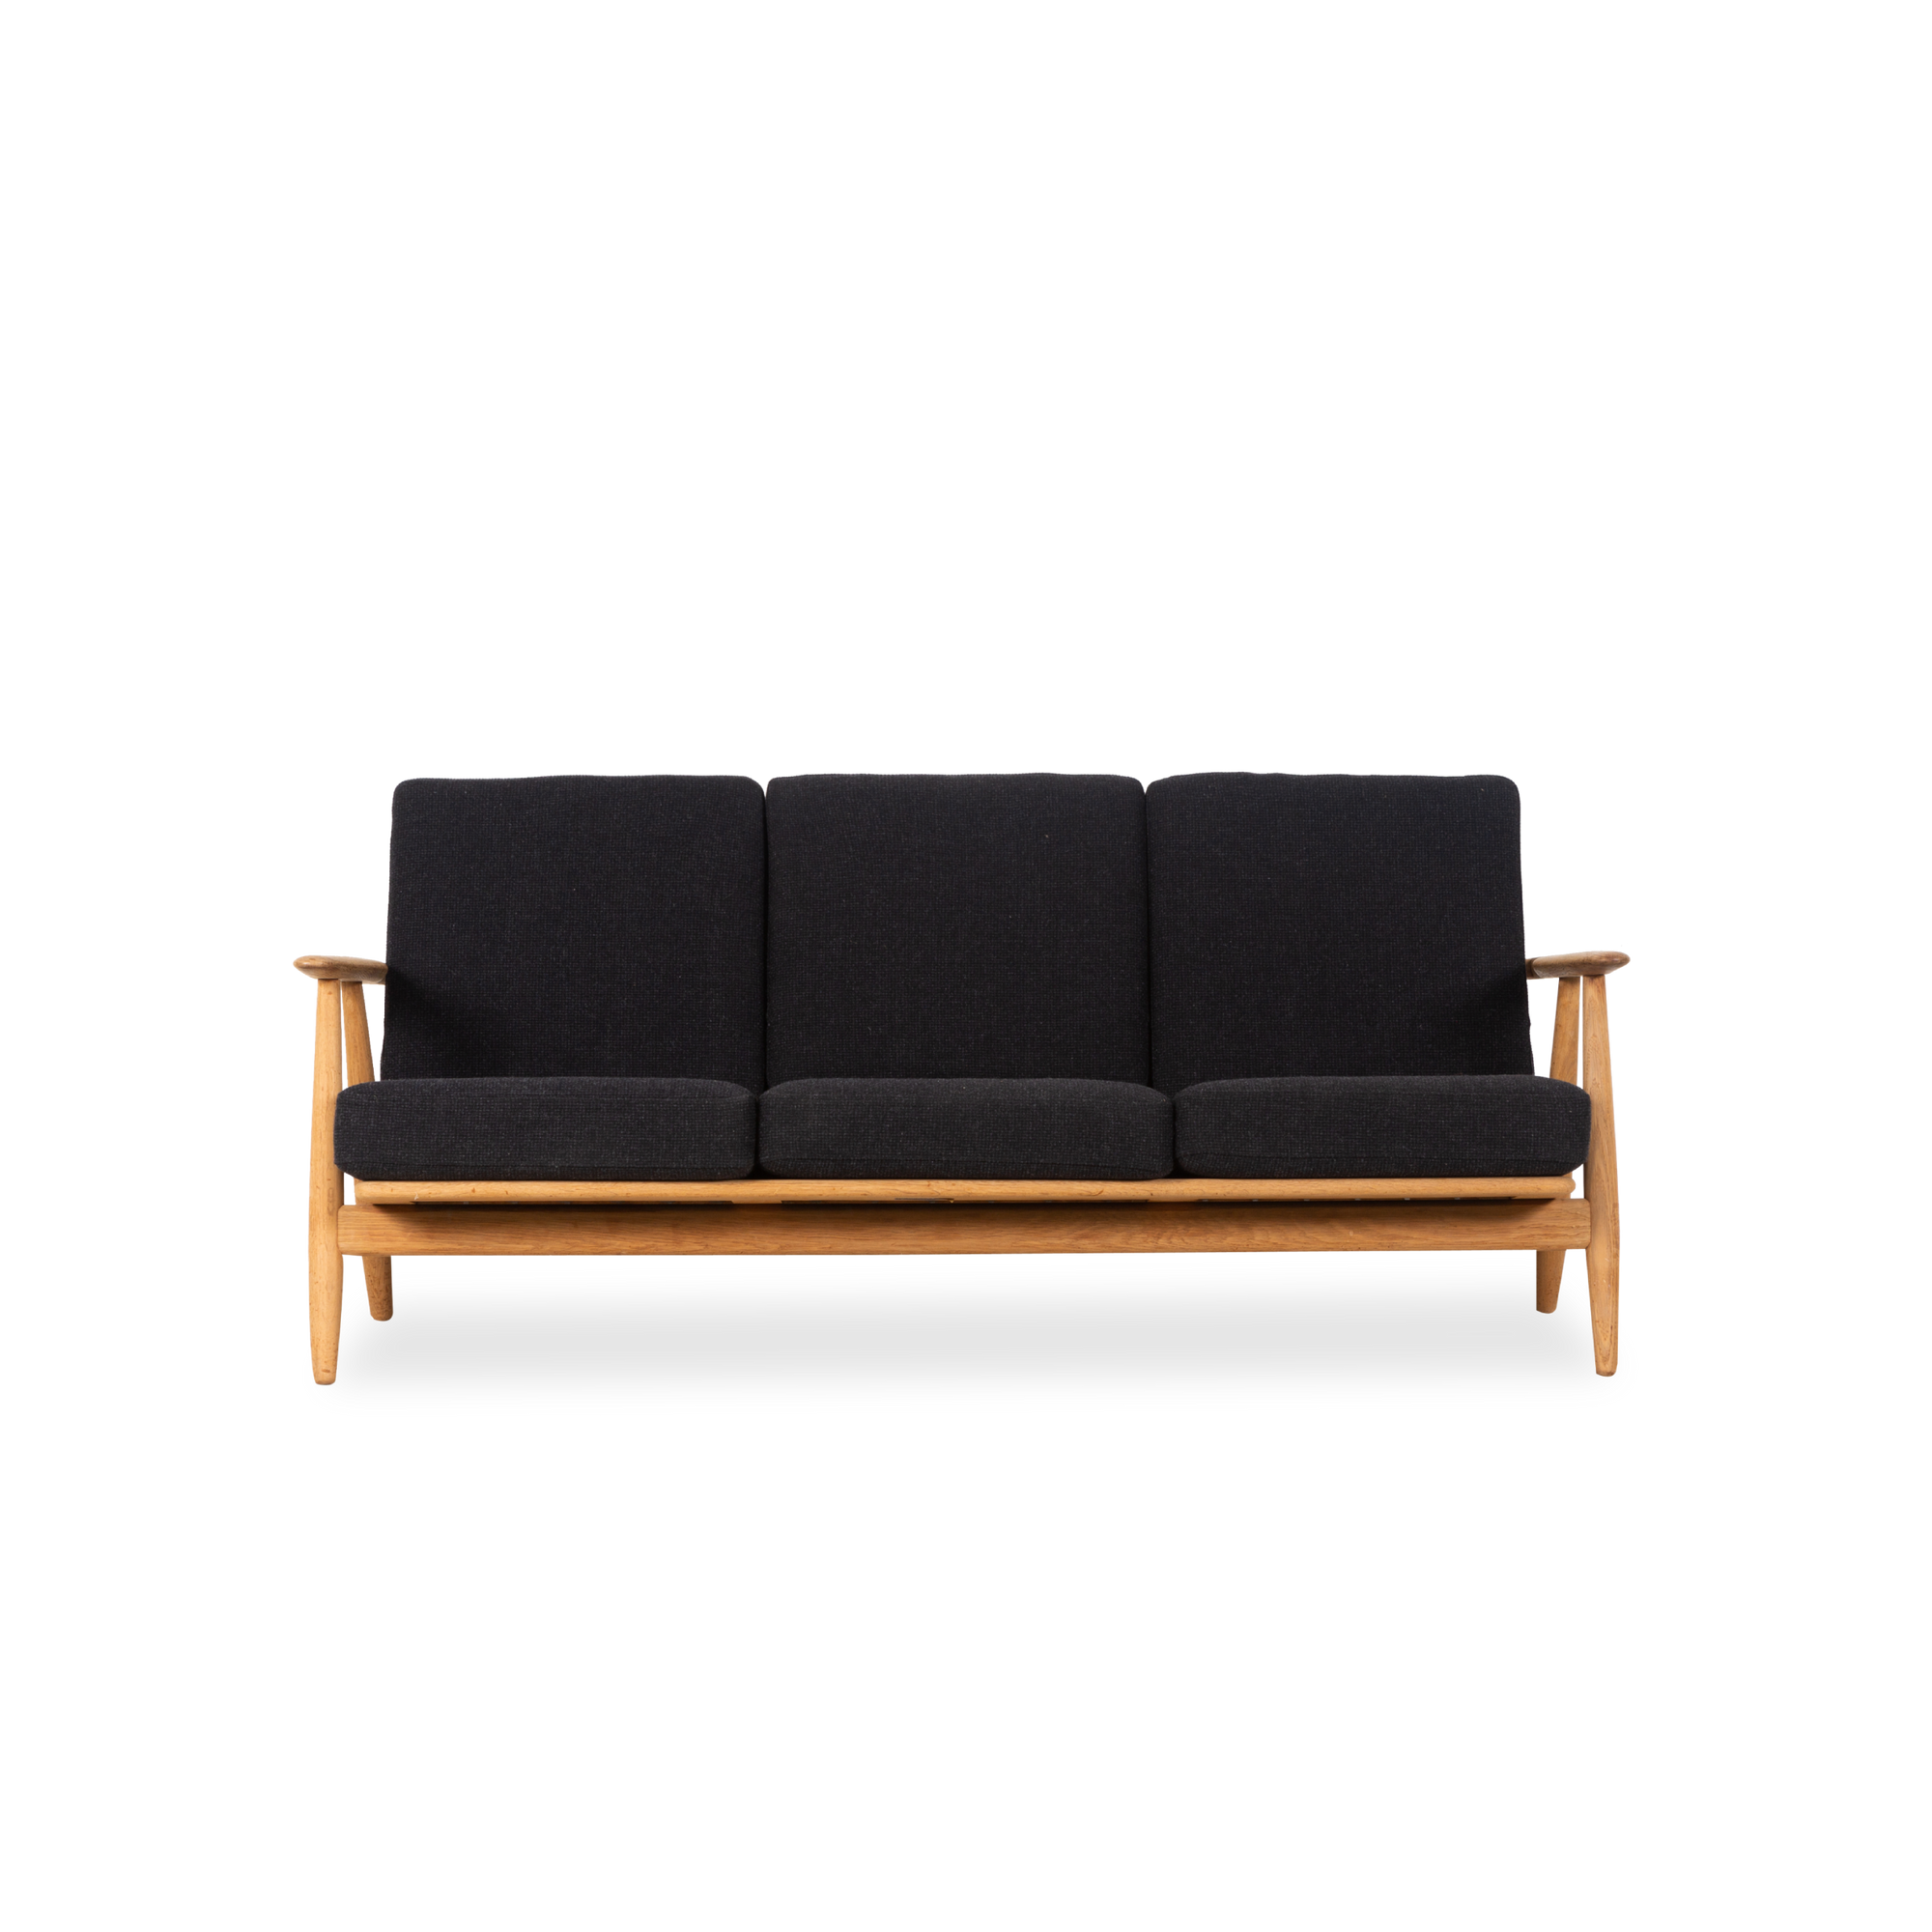 An icon of Danish design, this vintage GE-240 Cigar Sofa was designed by Hans Wegner and manufactured by GETAMA, circa 1950s.